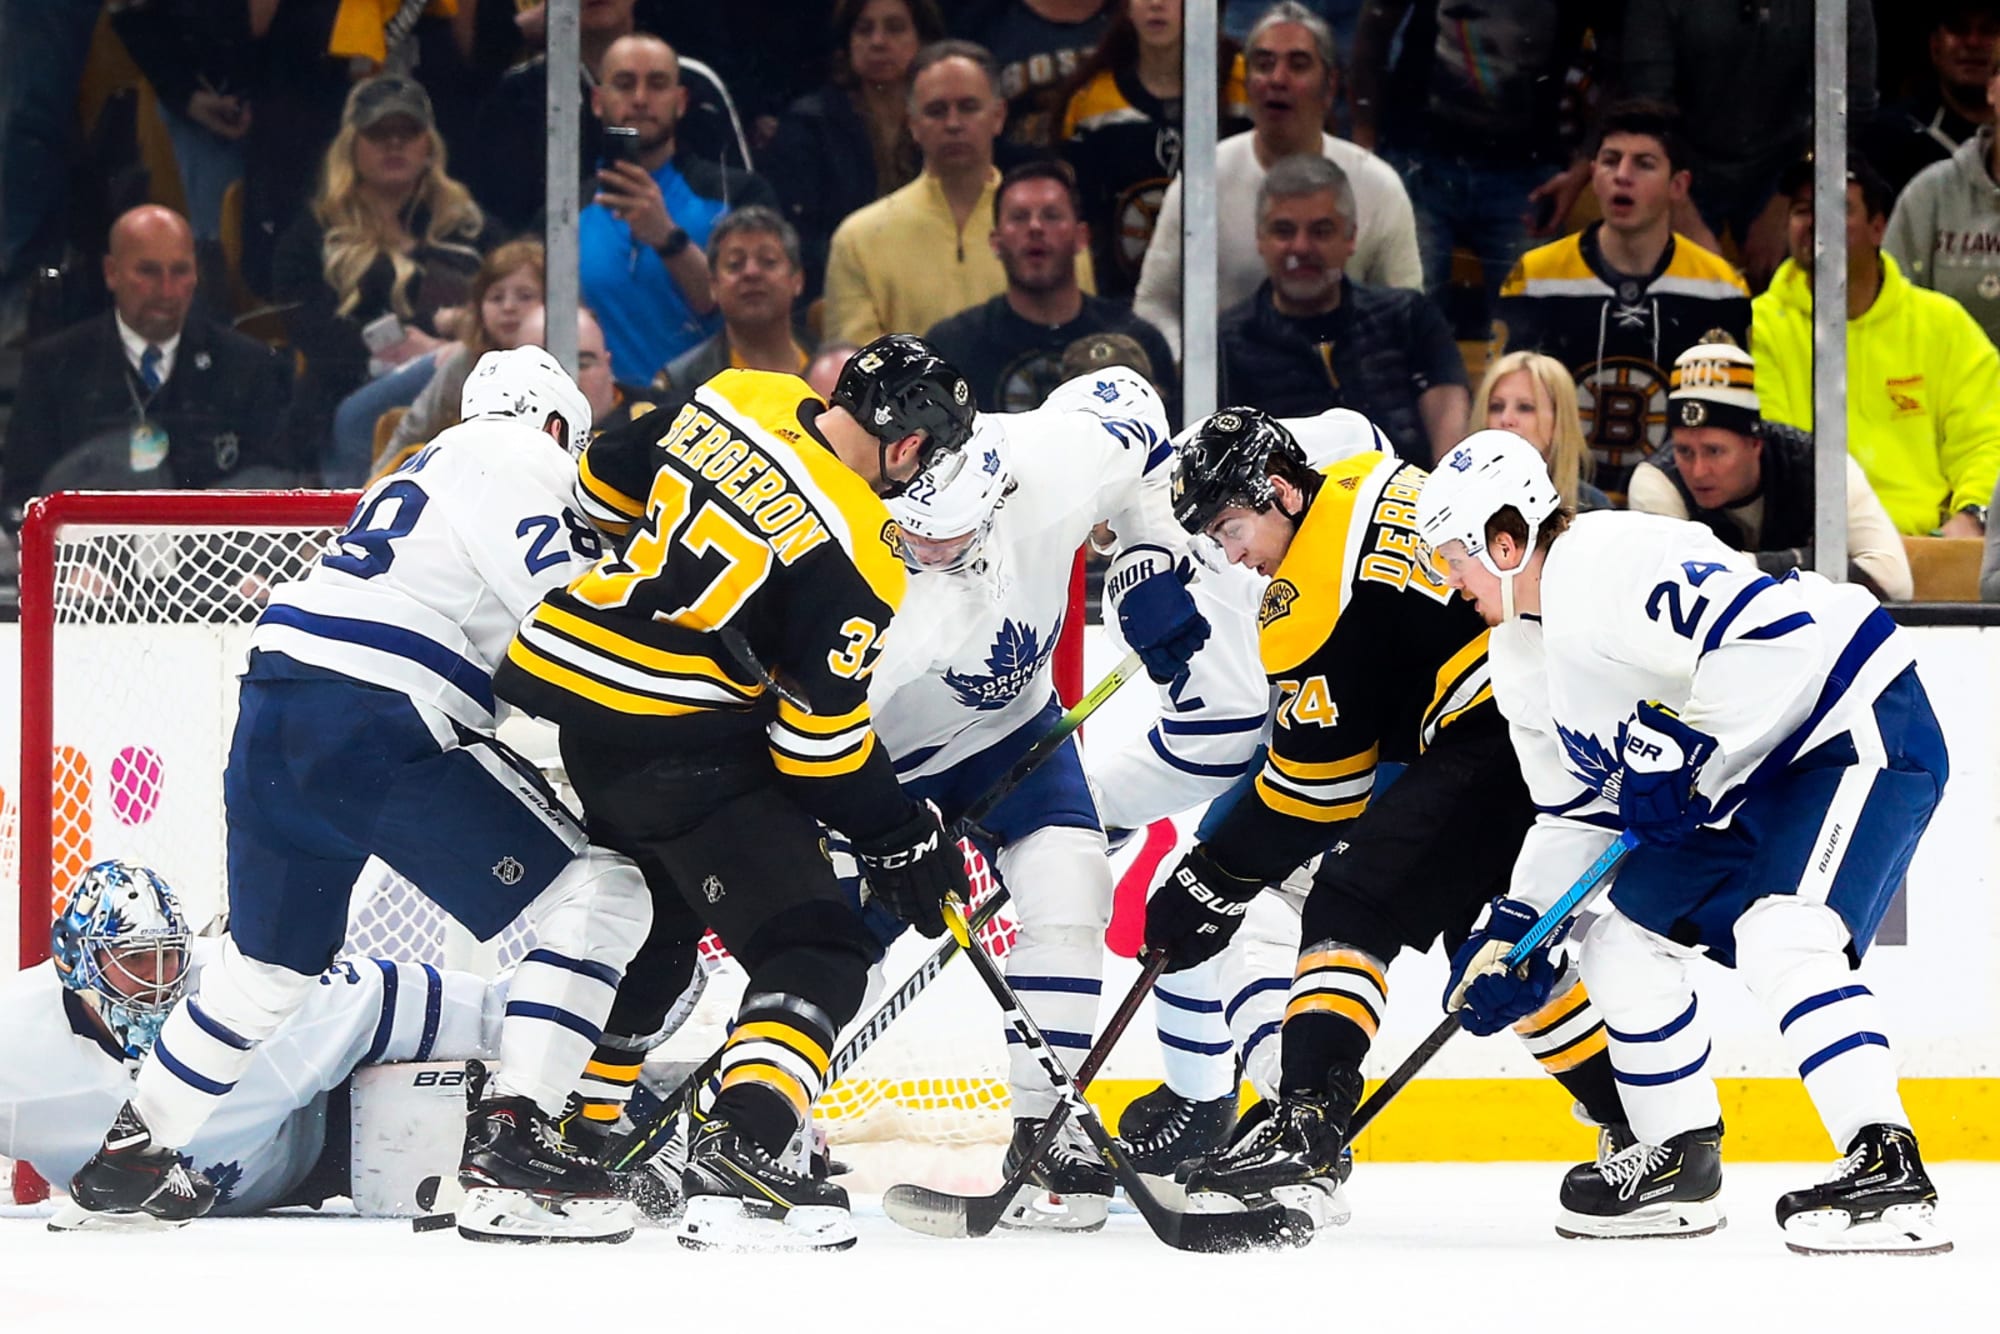 Stanley Cup Playoffs: Bruins vs Maple Leafs Game 3 start time, live stream